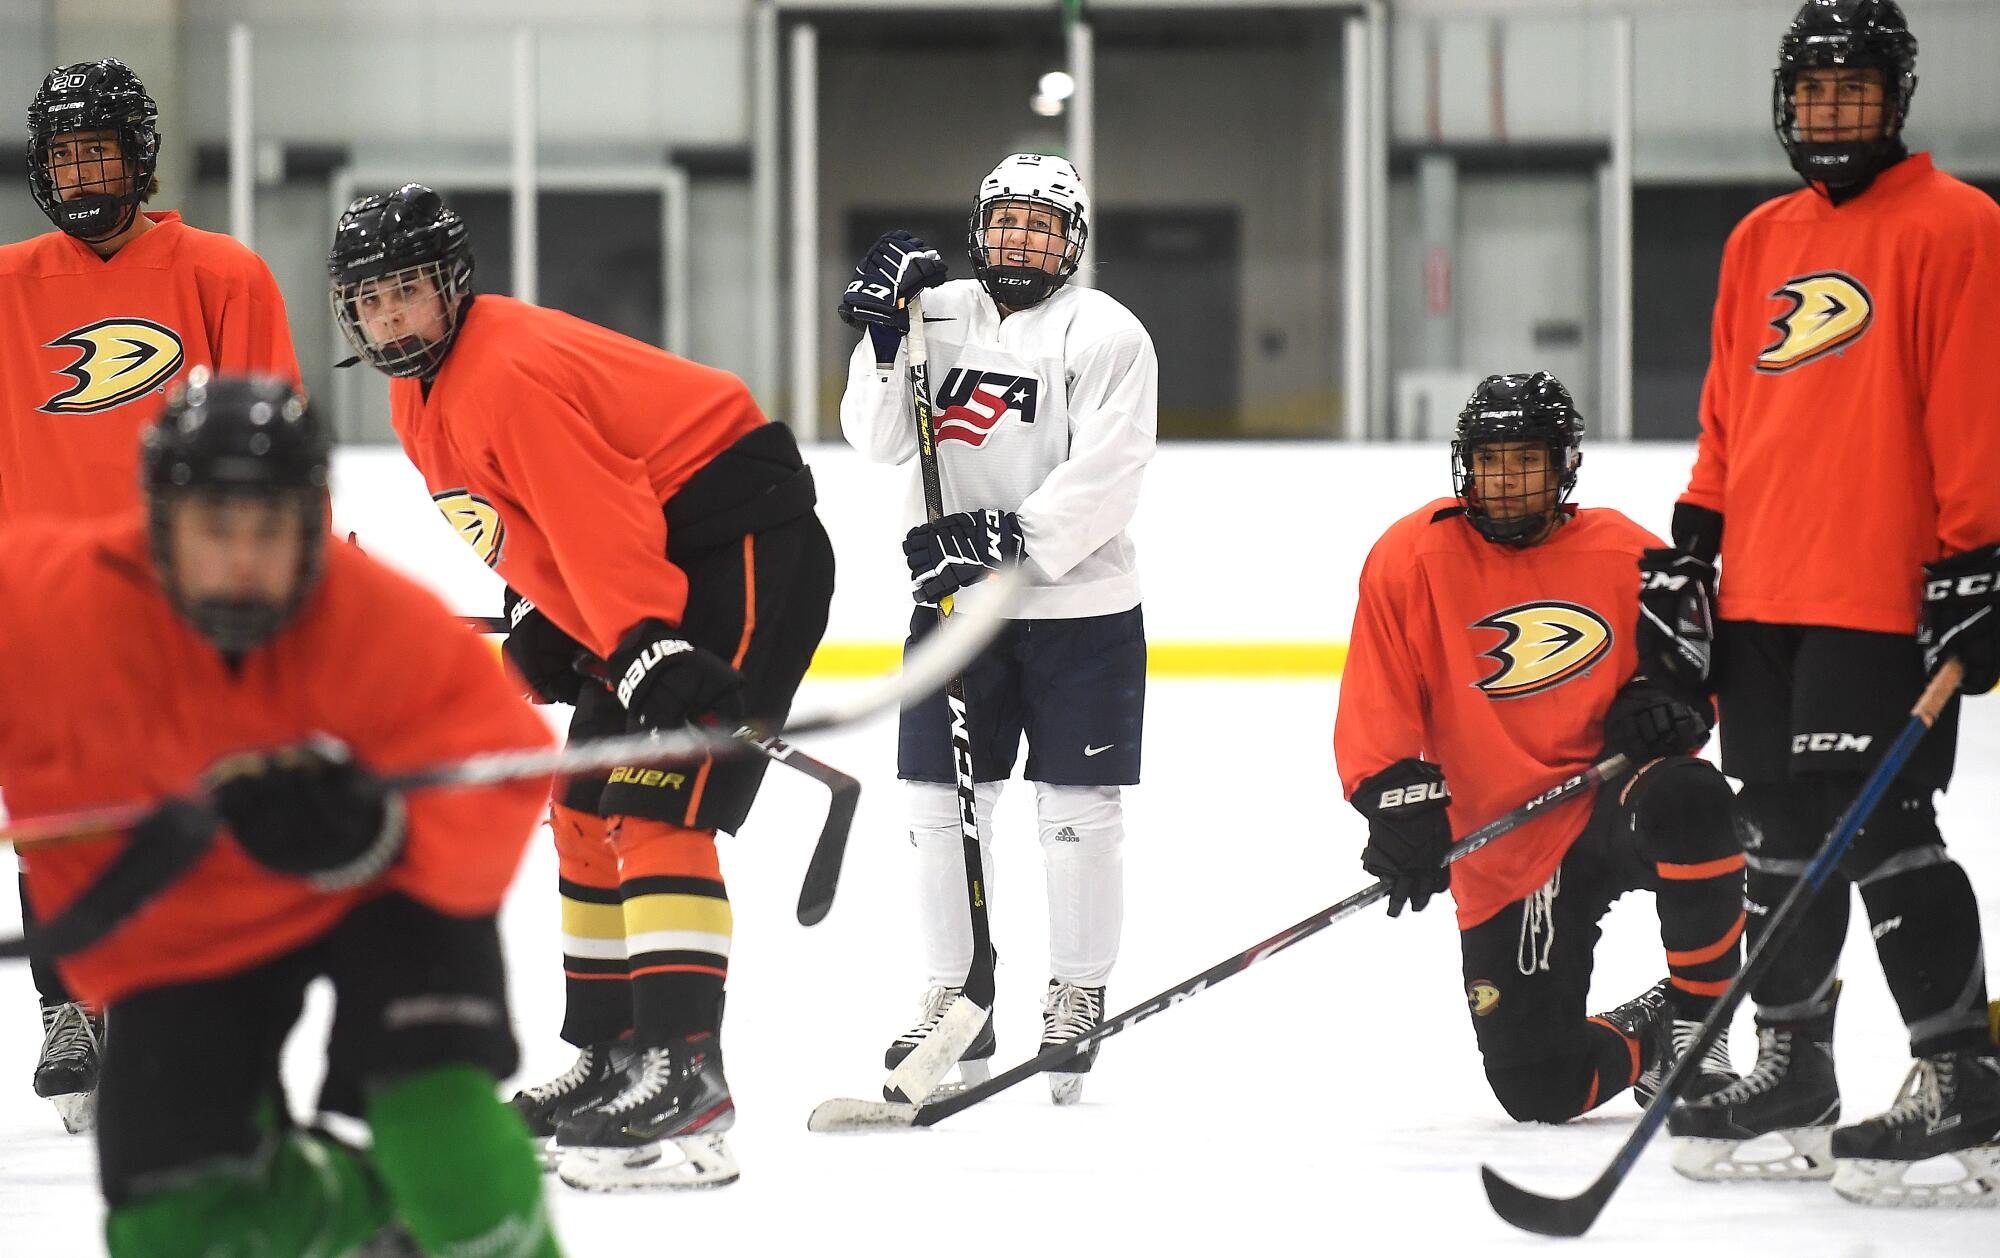 Kendall Coyne Schofield practices with the Ducks' under-16 boys team at Great Park Ice in Irvine.